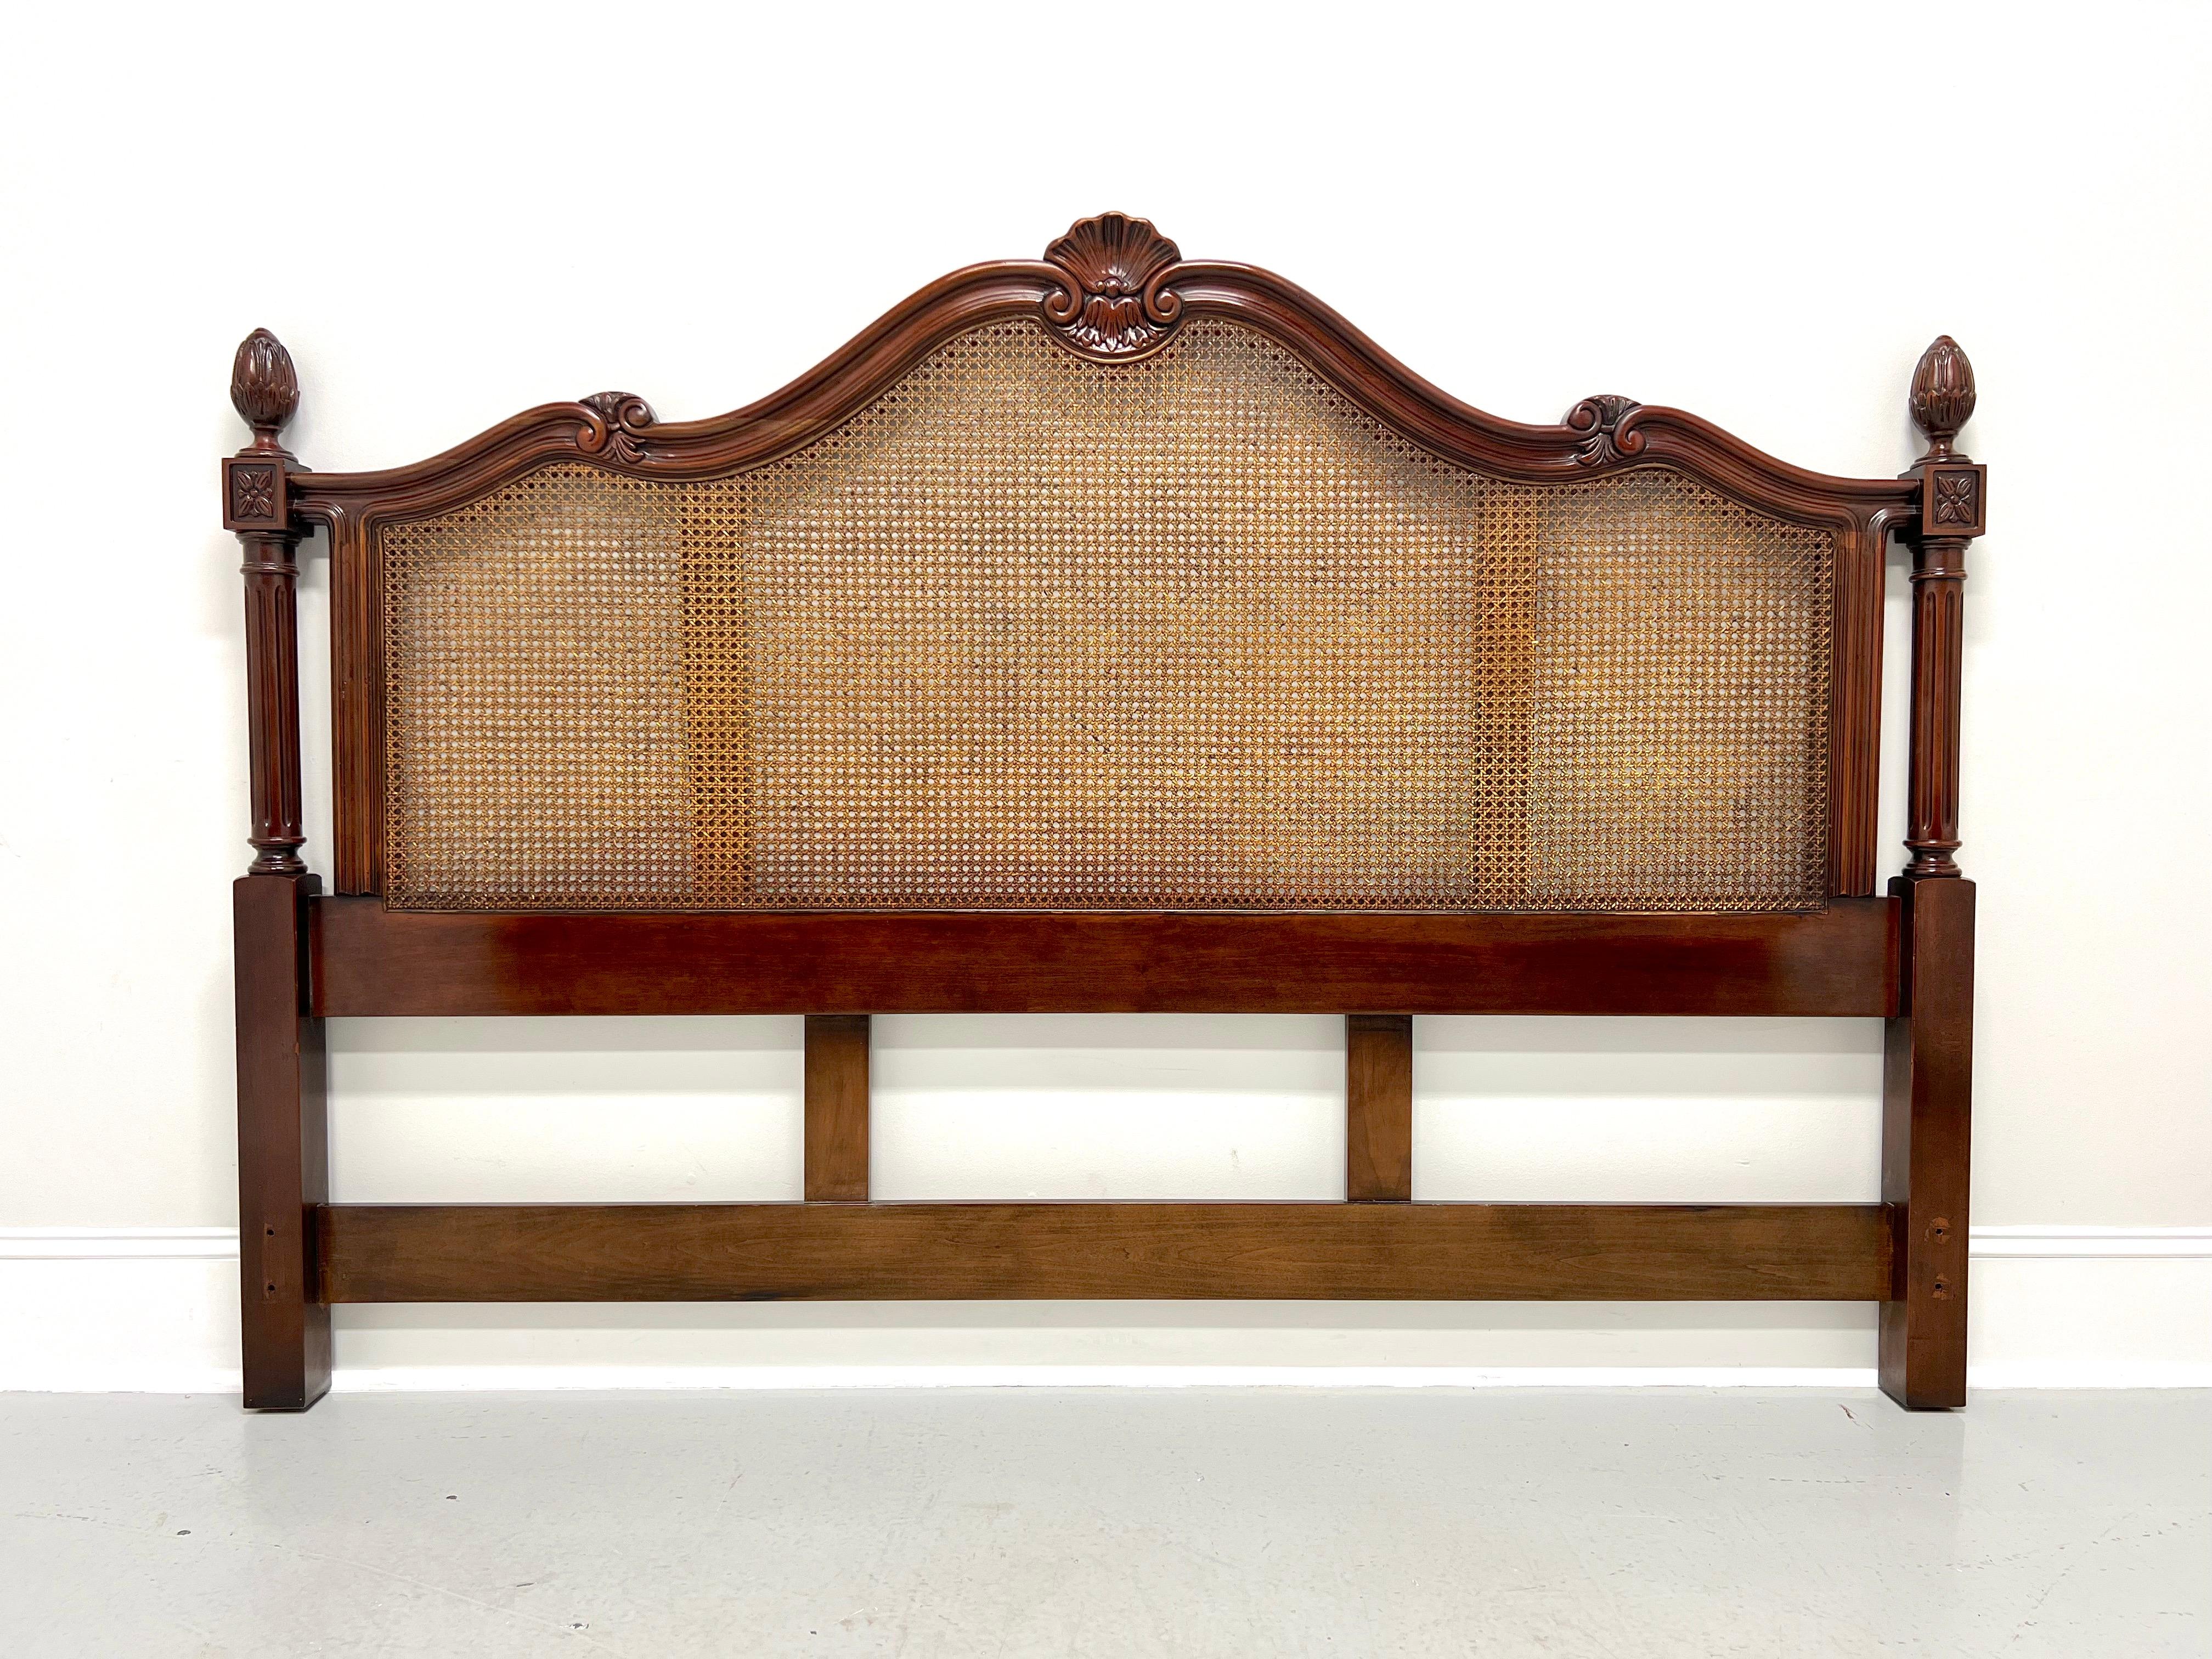 CENTURY Cardella Collection Cherry Caned Italian Provincial King Size Headboard 4